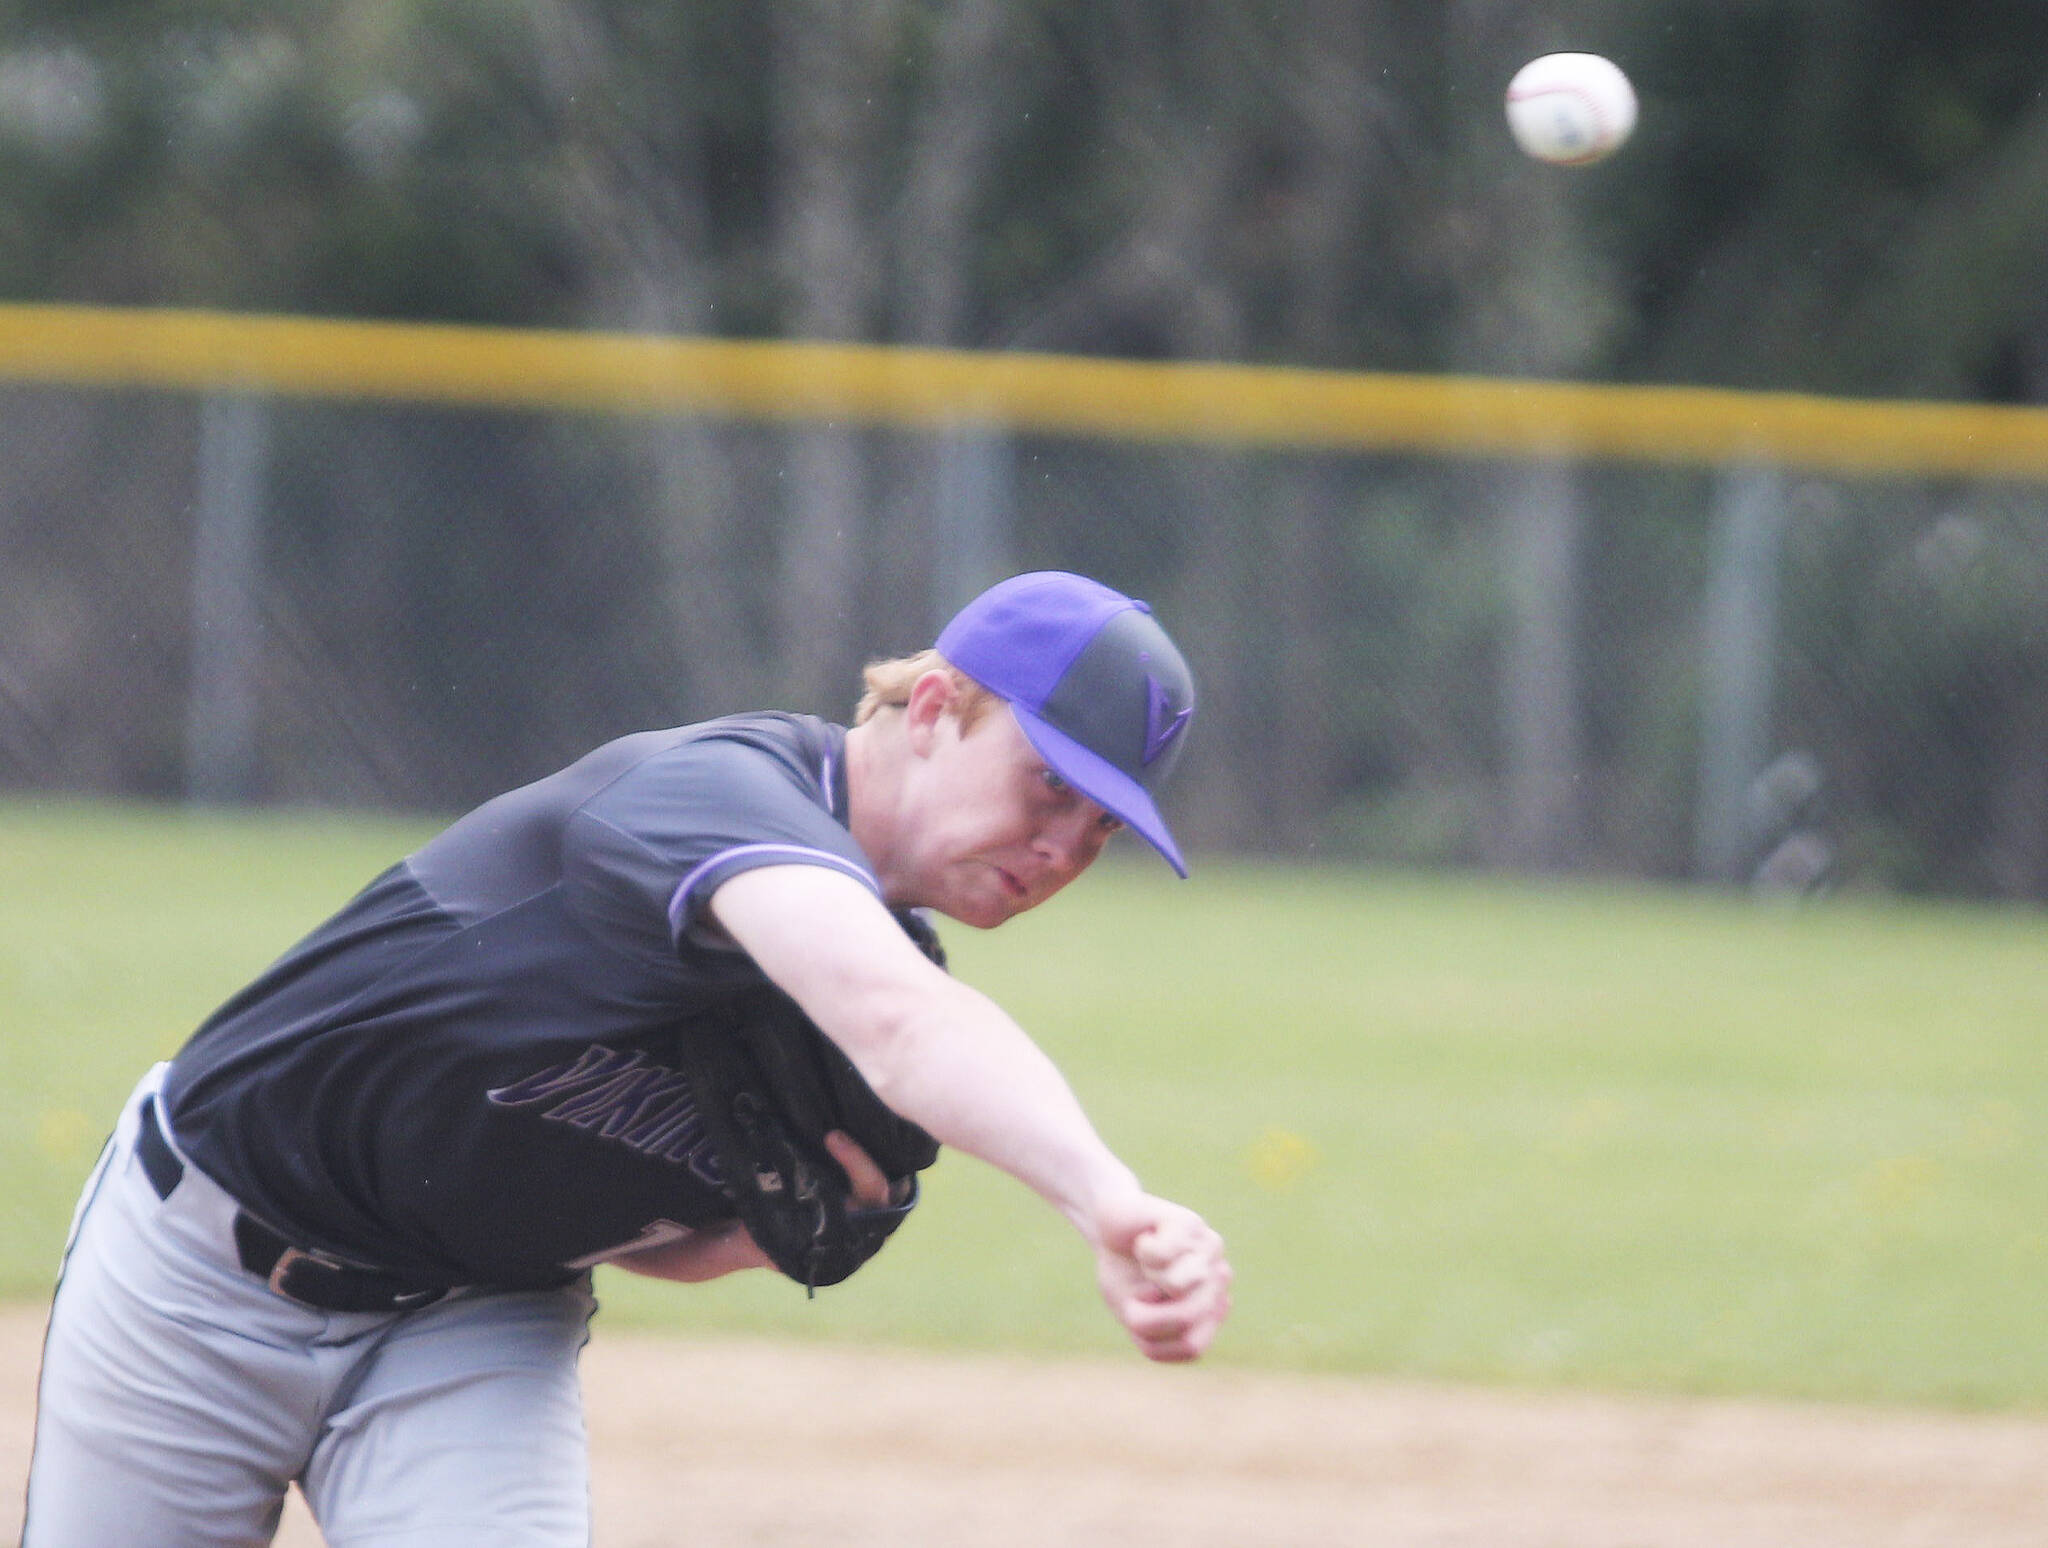 Pitching depth is always important, and the Vikings had success this year with Noah Sorenson, Dalton Brockett and Zach Edwards all on the mound.